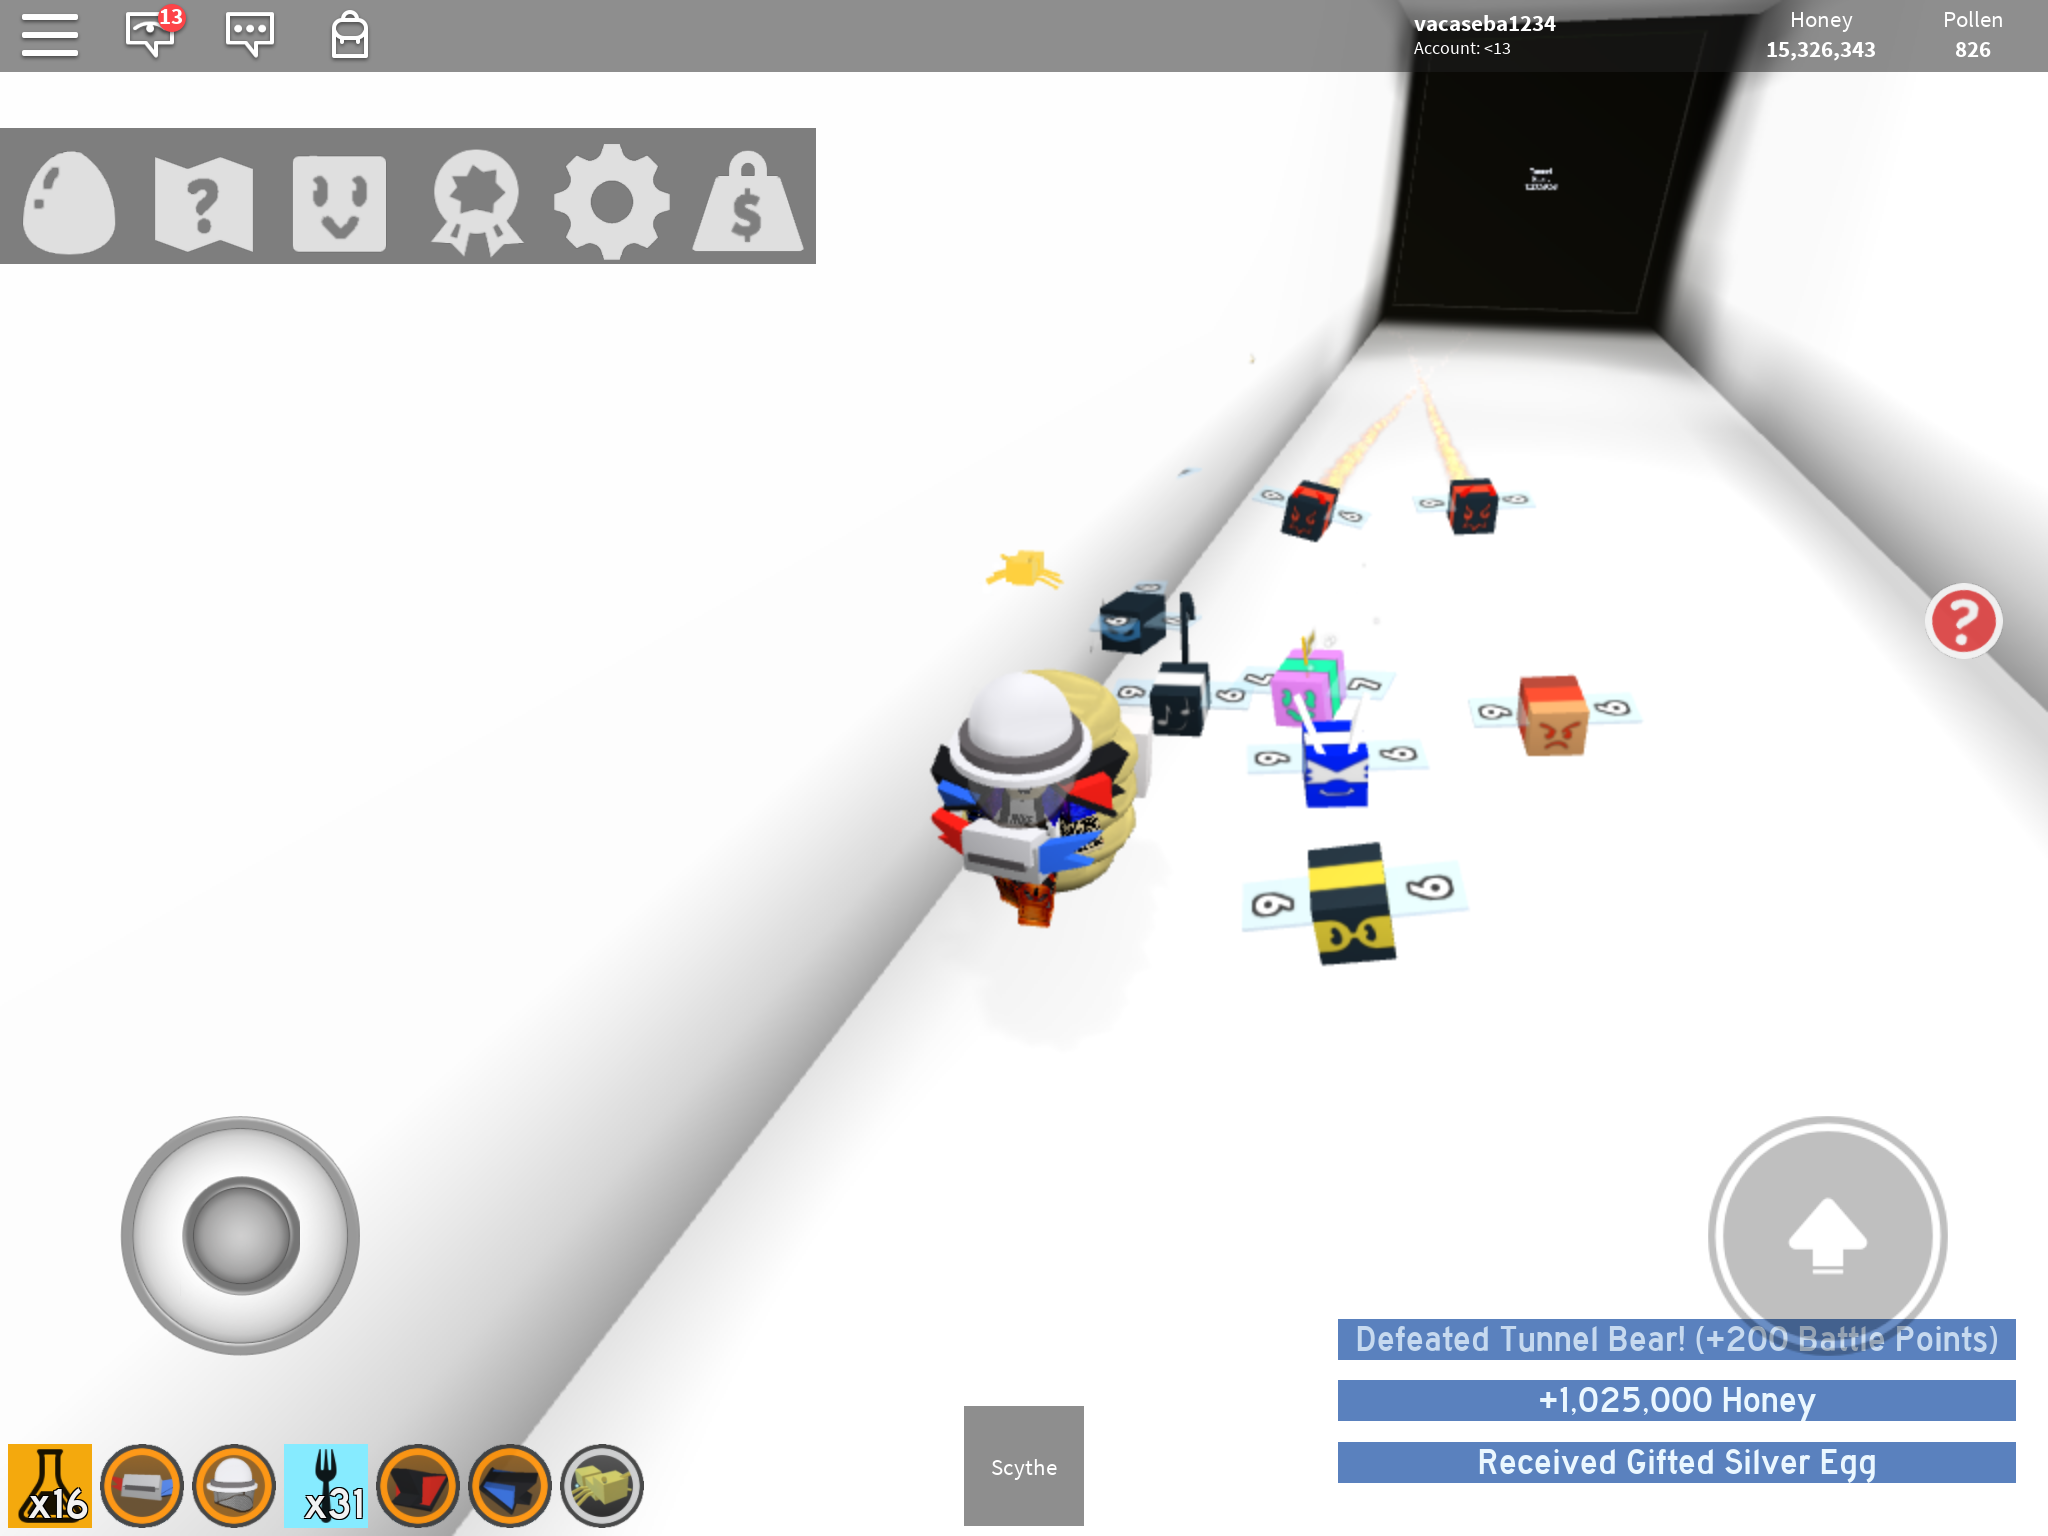 Chance Of Getting Gifted Silver Egg In 2nd Try Tunnel Bear Fandom - how to beat tunnel bear white tunnel roblox bee swarm